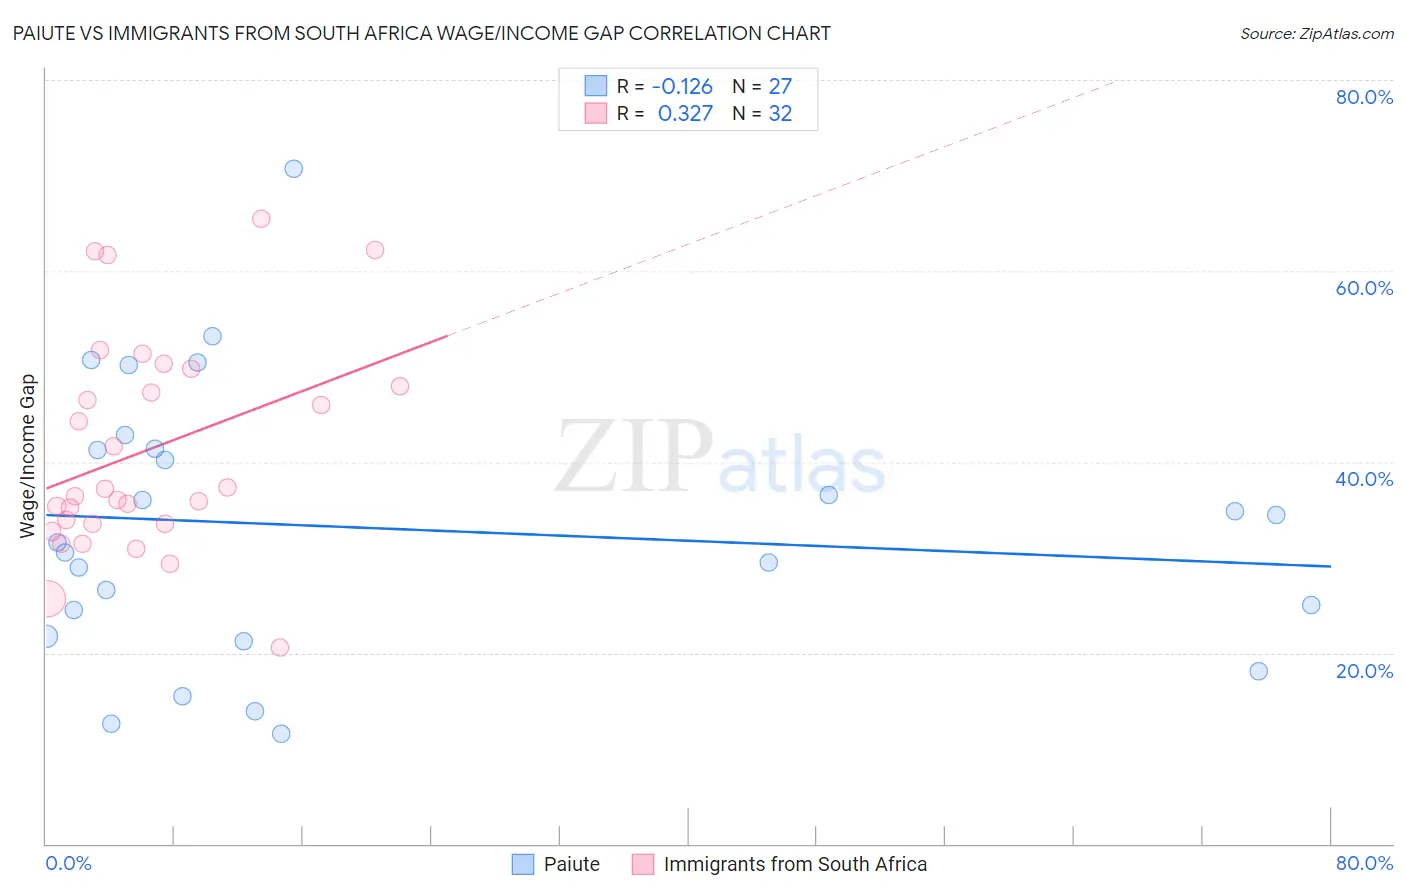 Paiute vs Immigrants from South Africa Wage/Income Gap